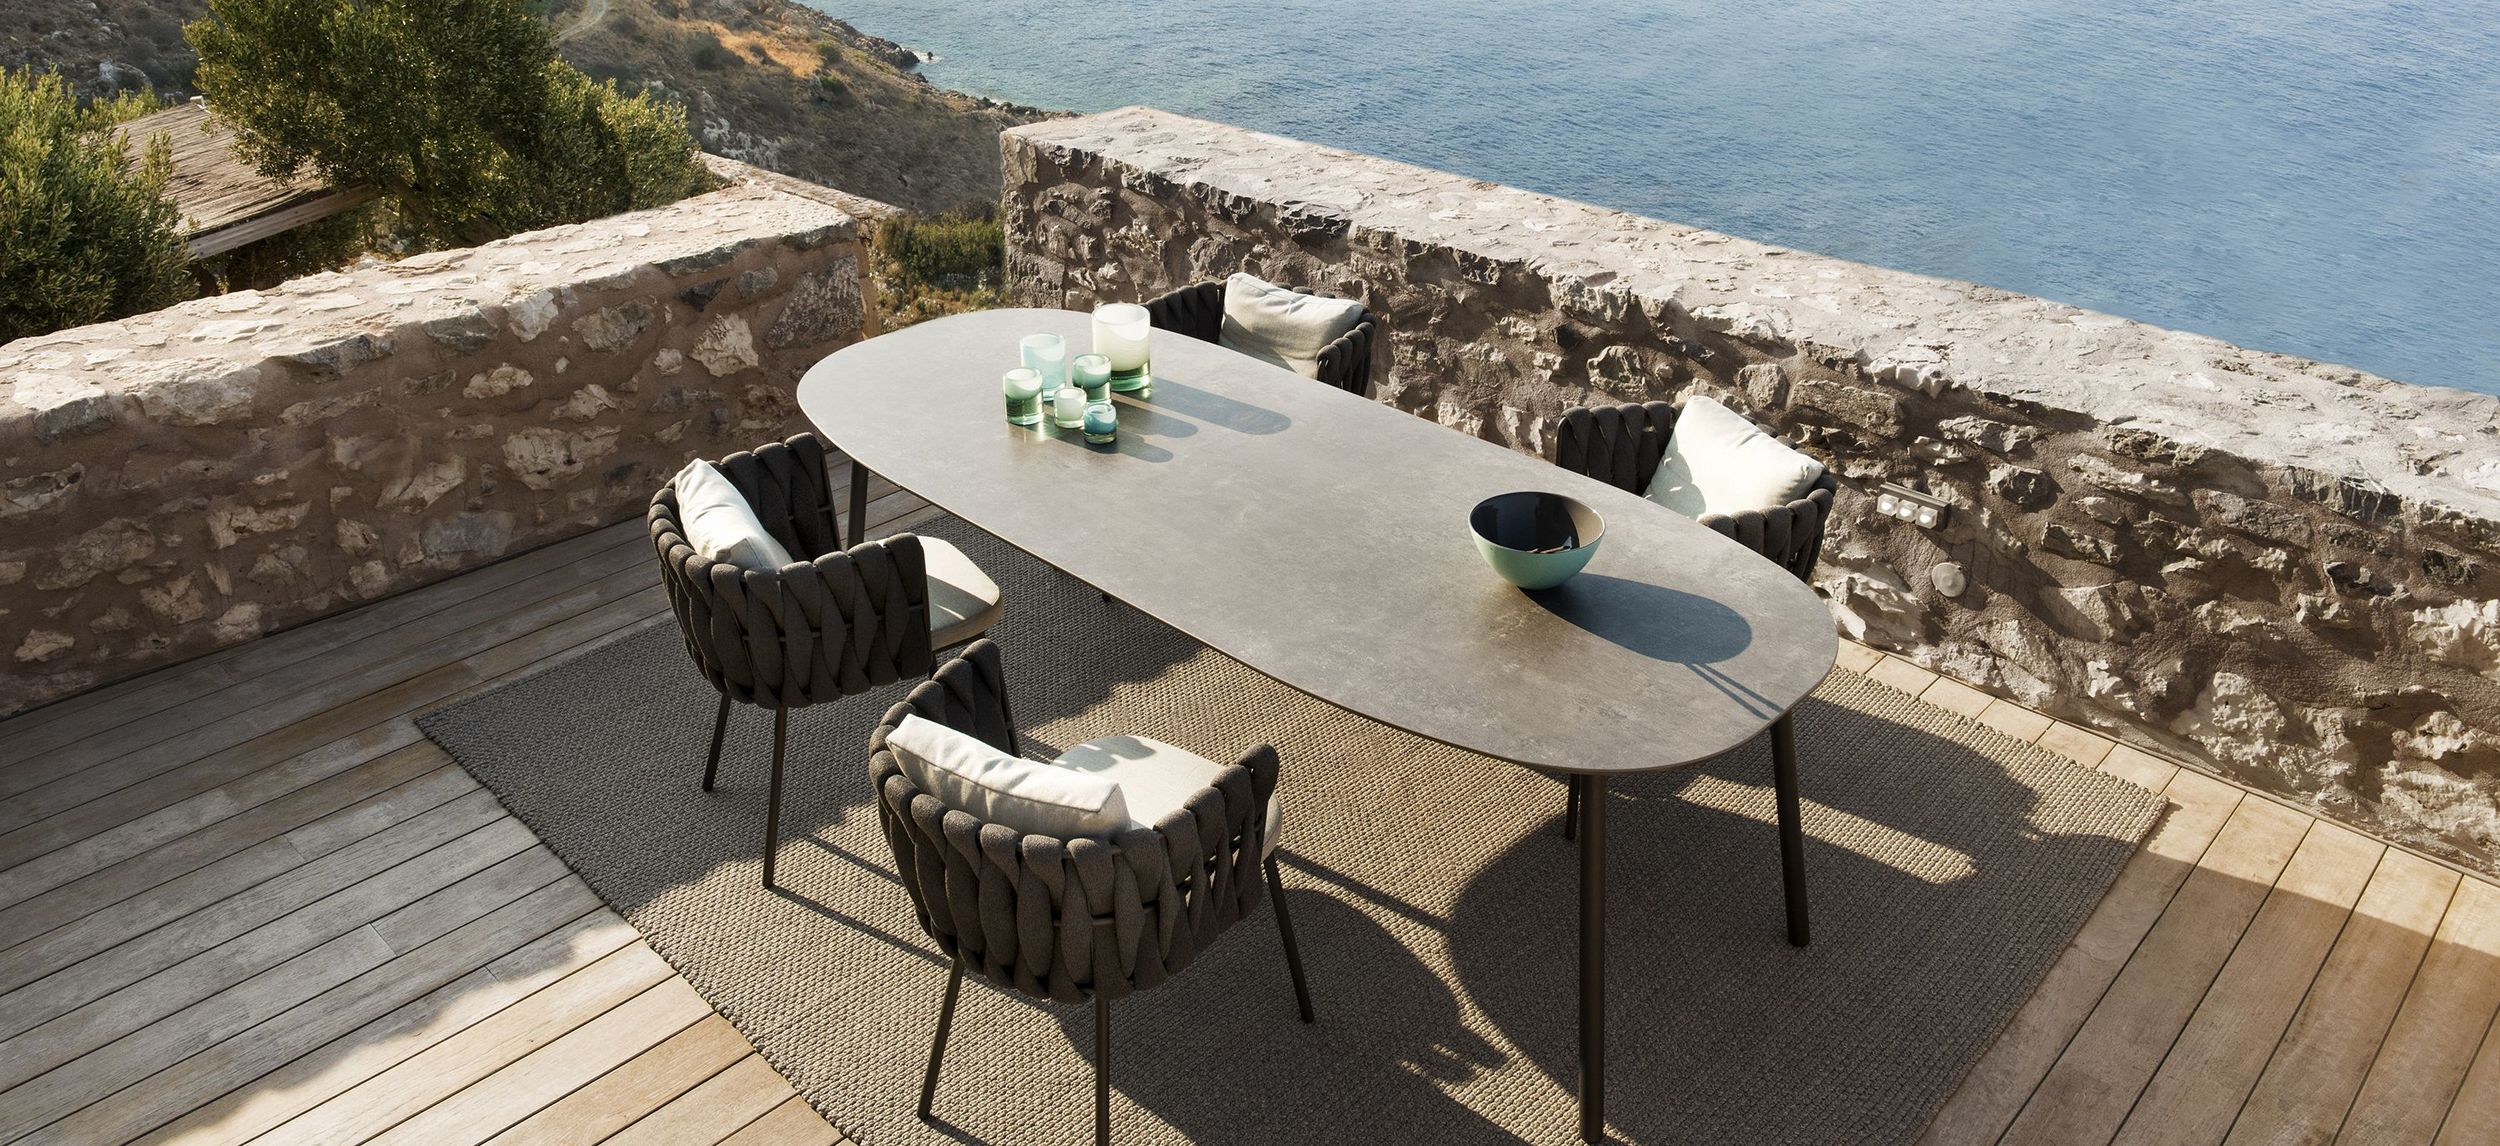 Tosca armchairs and table by Monica Armani for Tribù